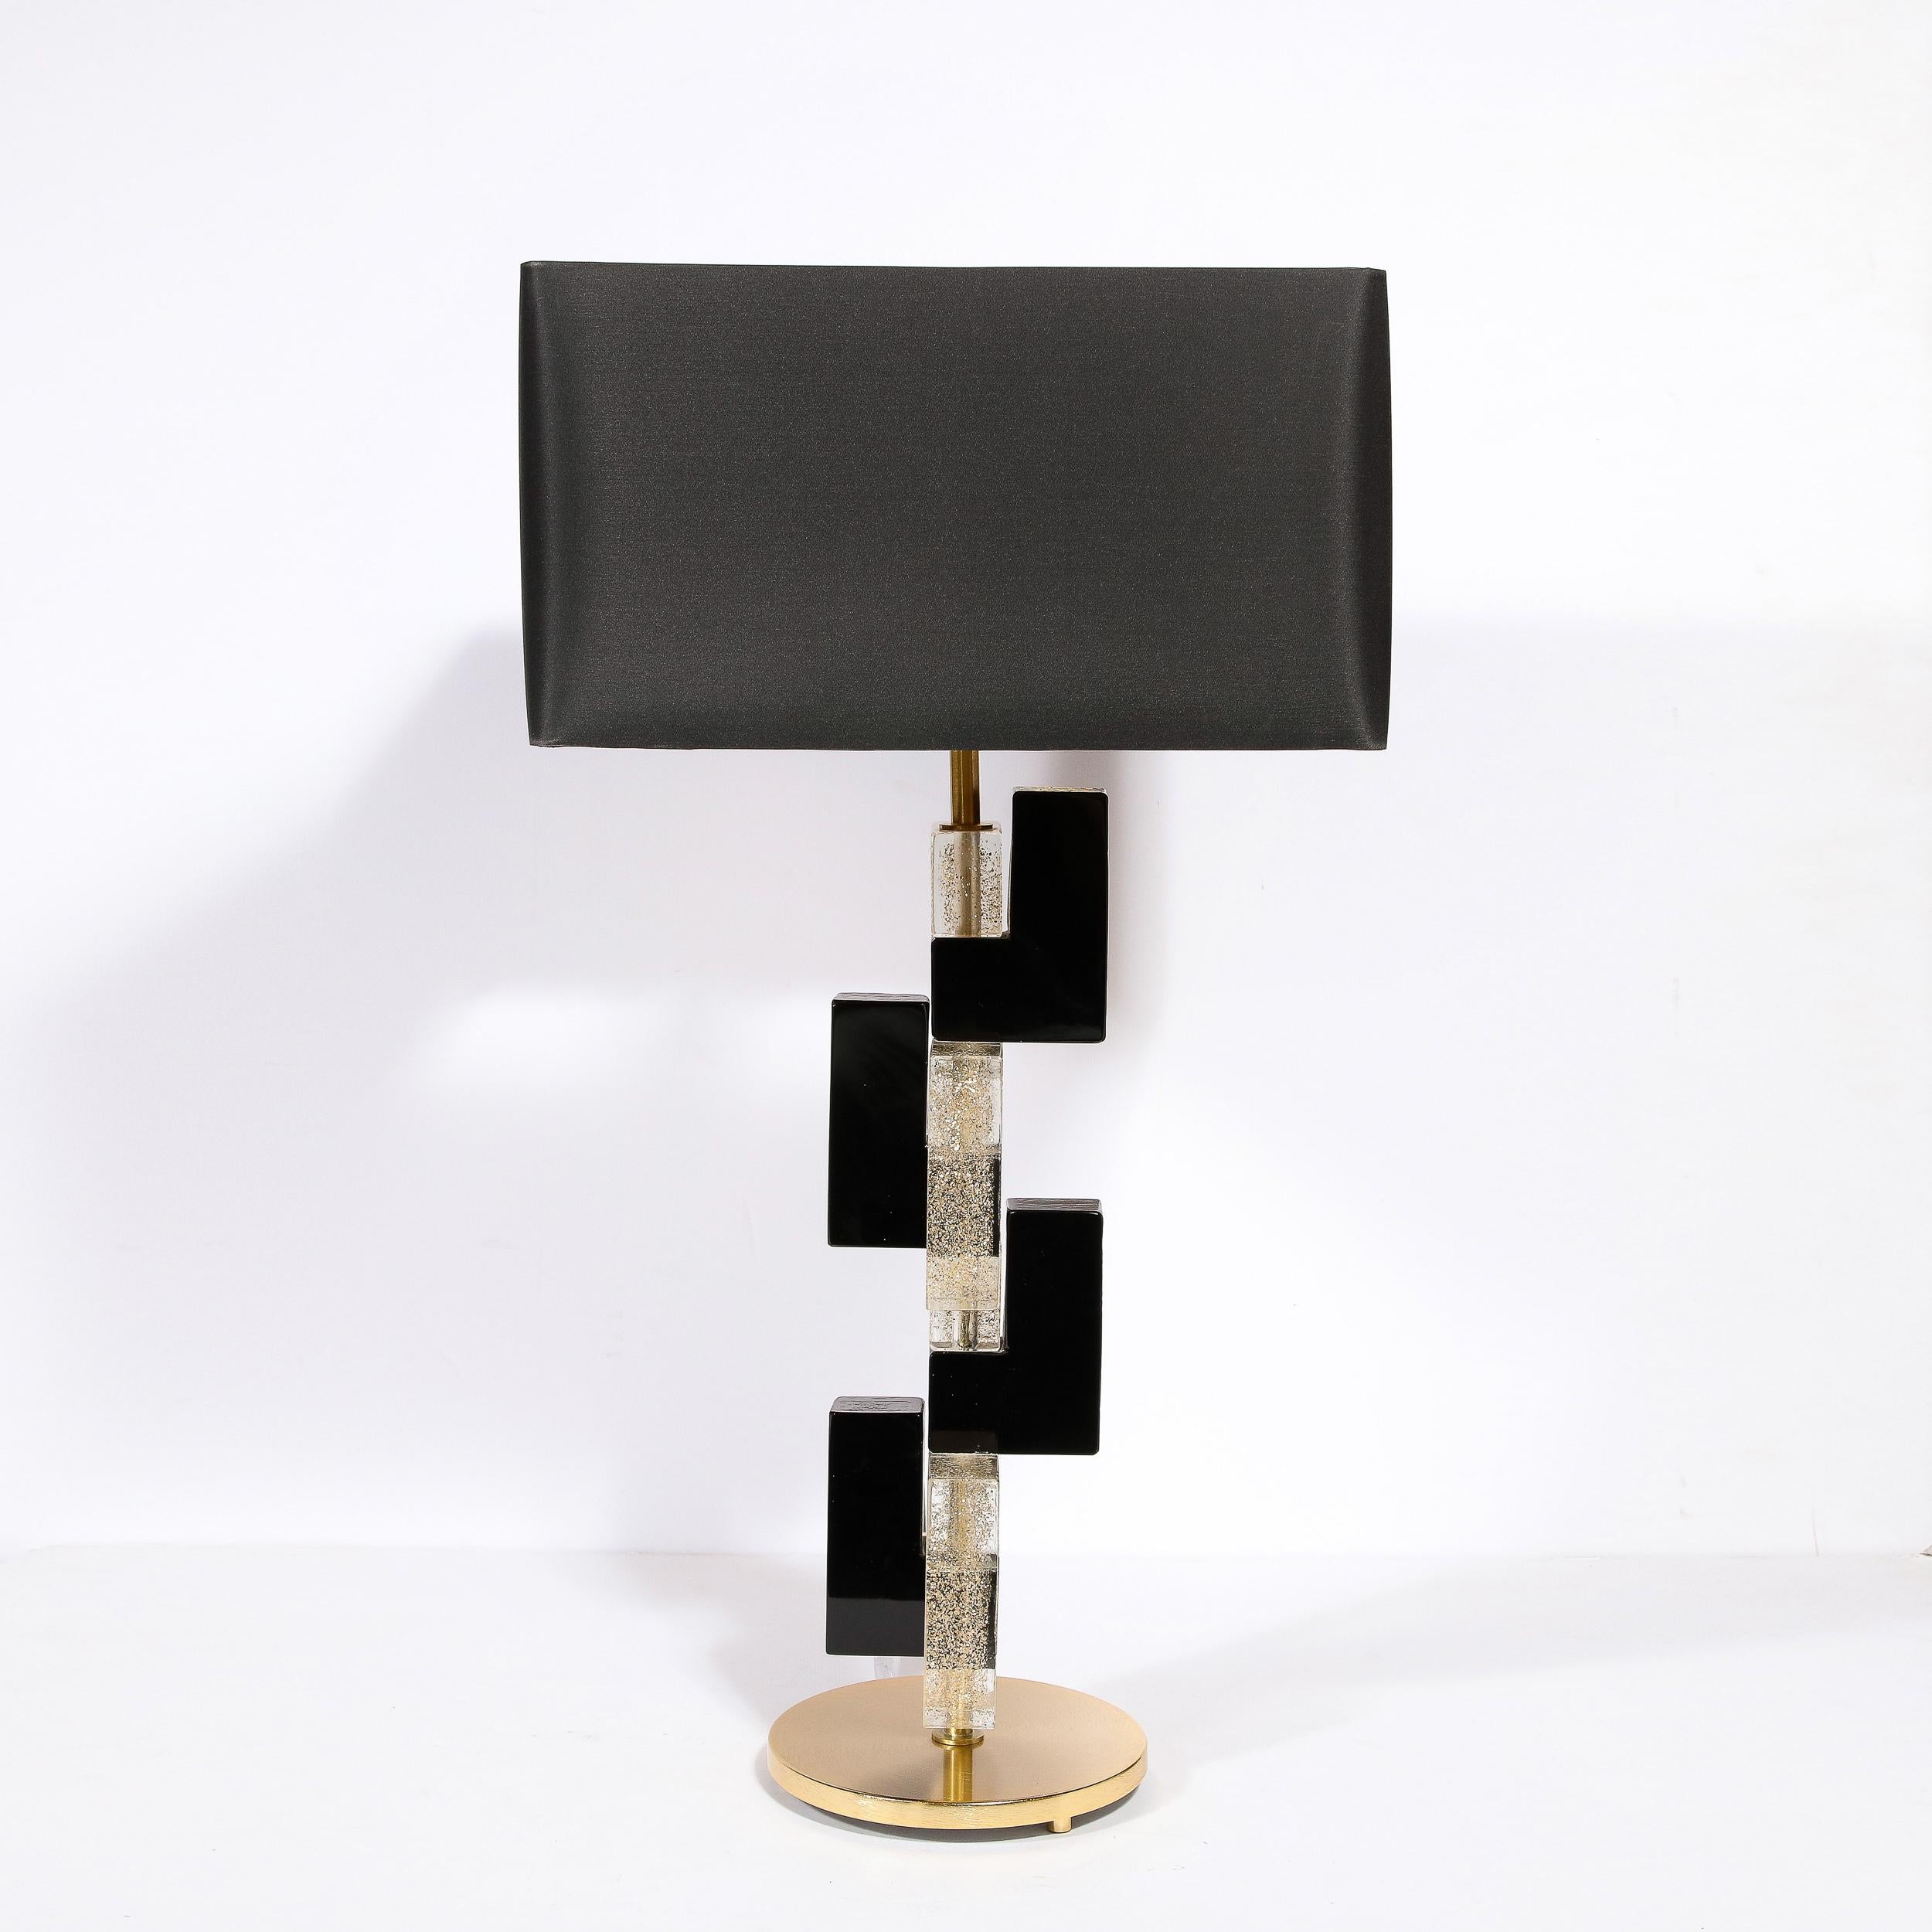 Italian Modernist Hand-Blown Murano Rectilinear Table Lamps in Black & Translucent Glass For Sale